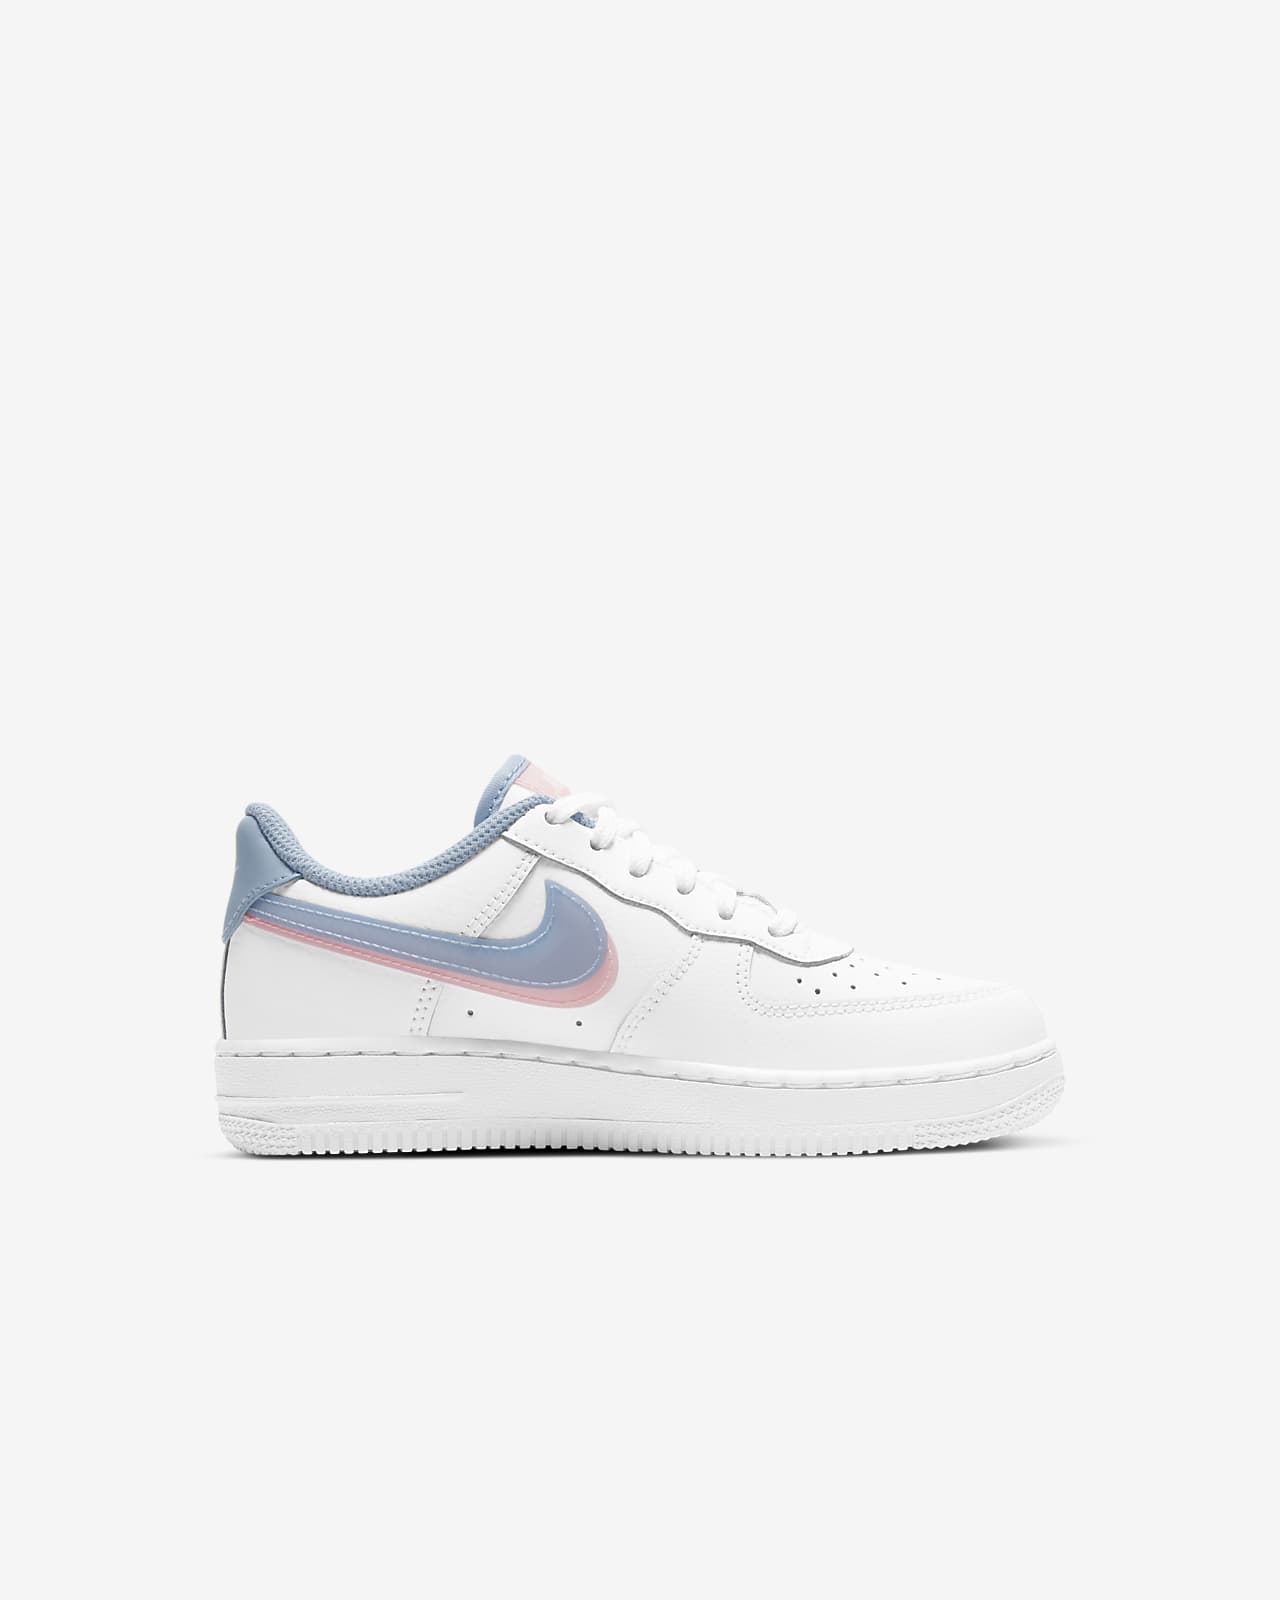 nike air force 1 lv8 size 8